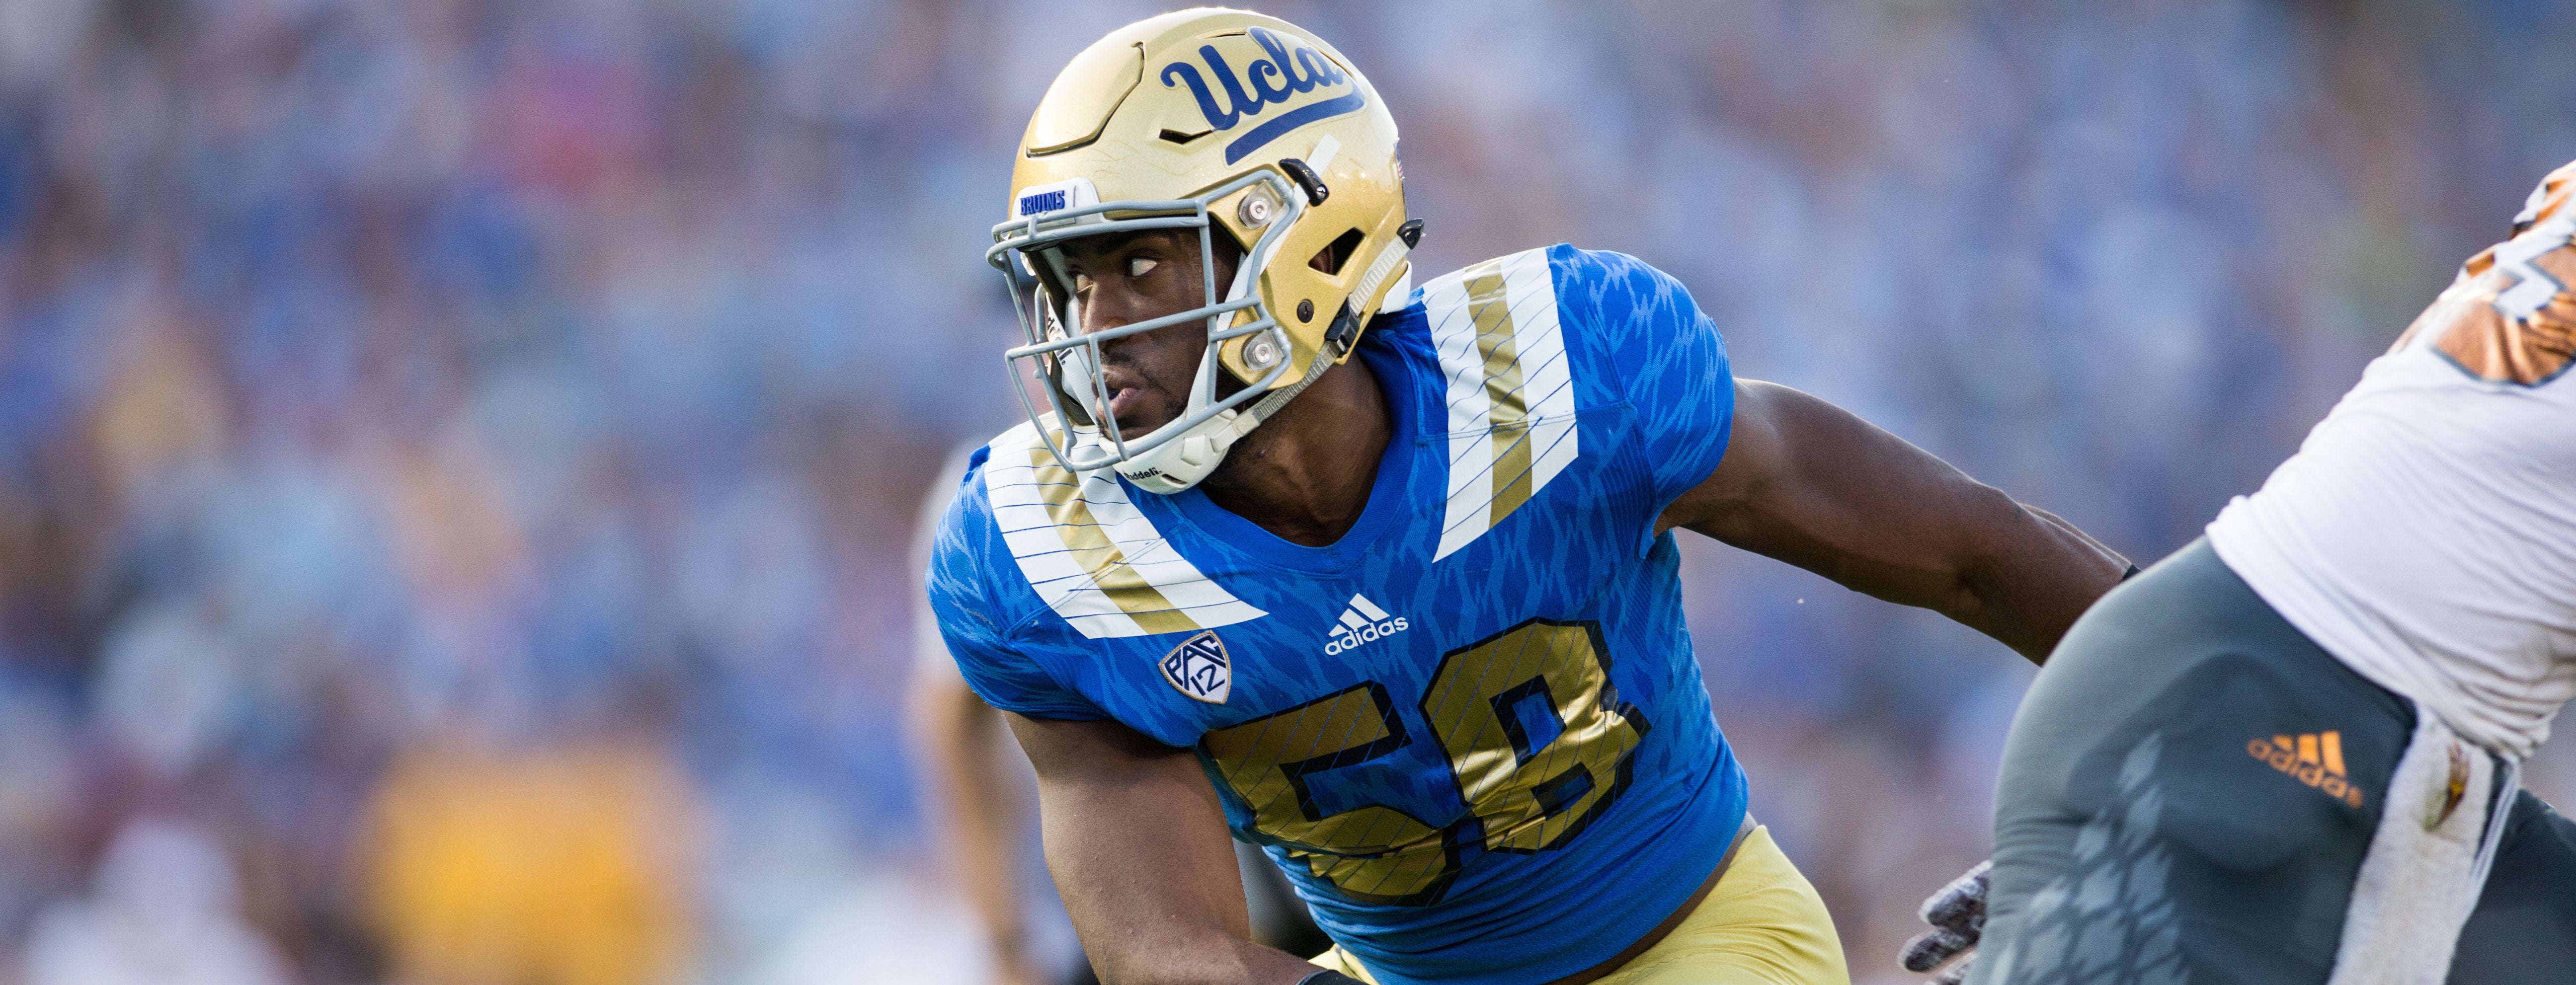 UCLA football: Bruins unveil new jerseys by Adidas - Sports Illustrated